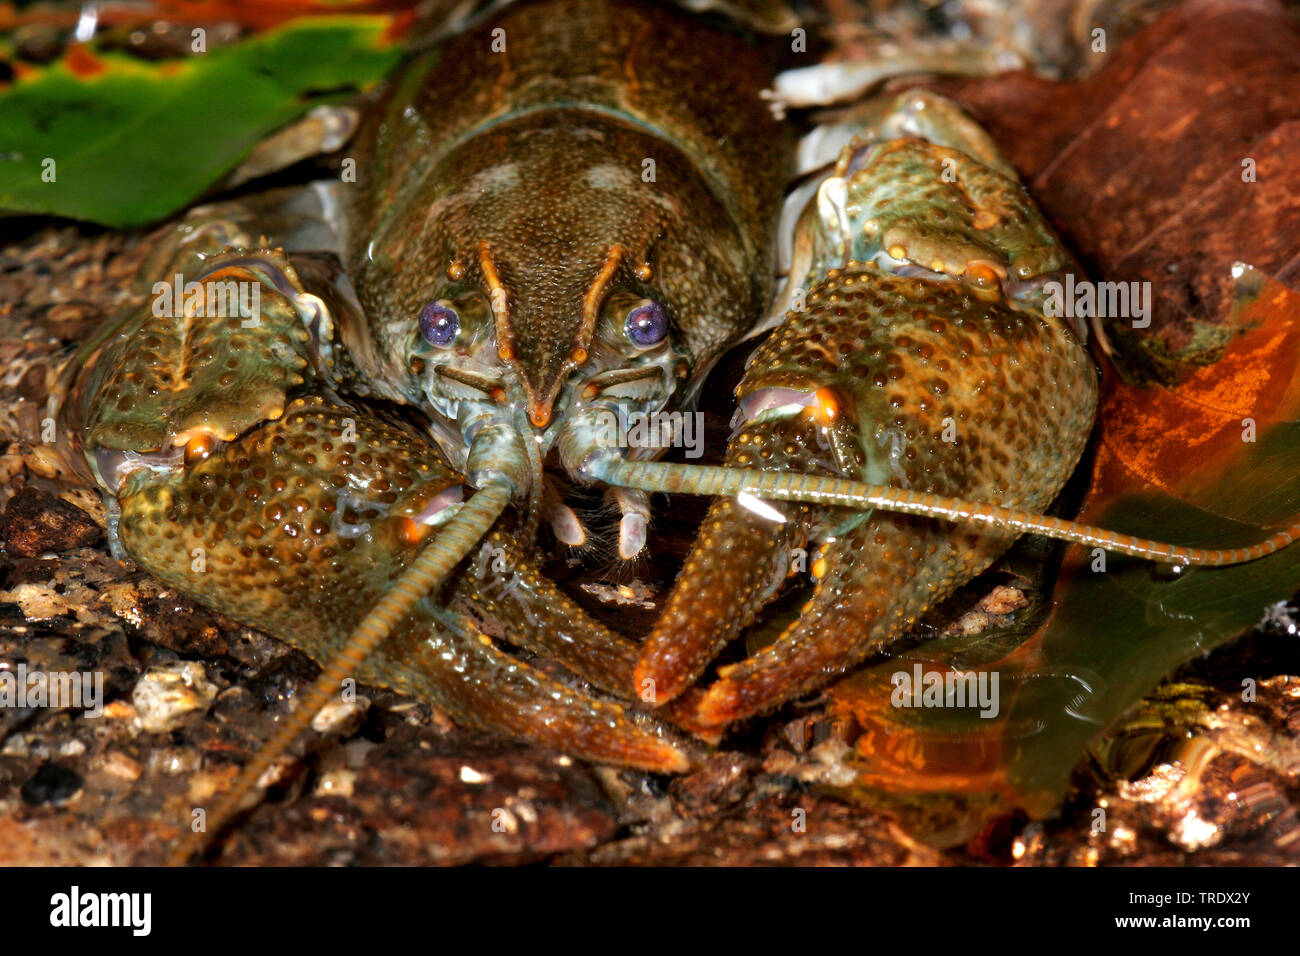 Stone crayfish, Torrent crayfish (Astacus torrentium, Austropotamobius torrentium, Potamobius torrentium, Astacus saxatilis), by the waterside, front view, Germany Stock Photo